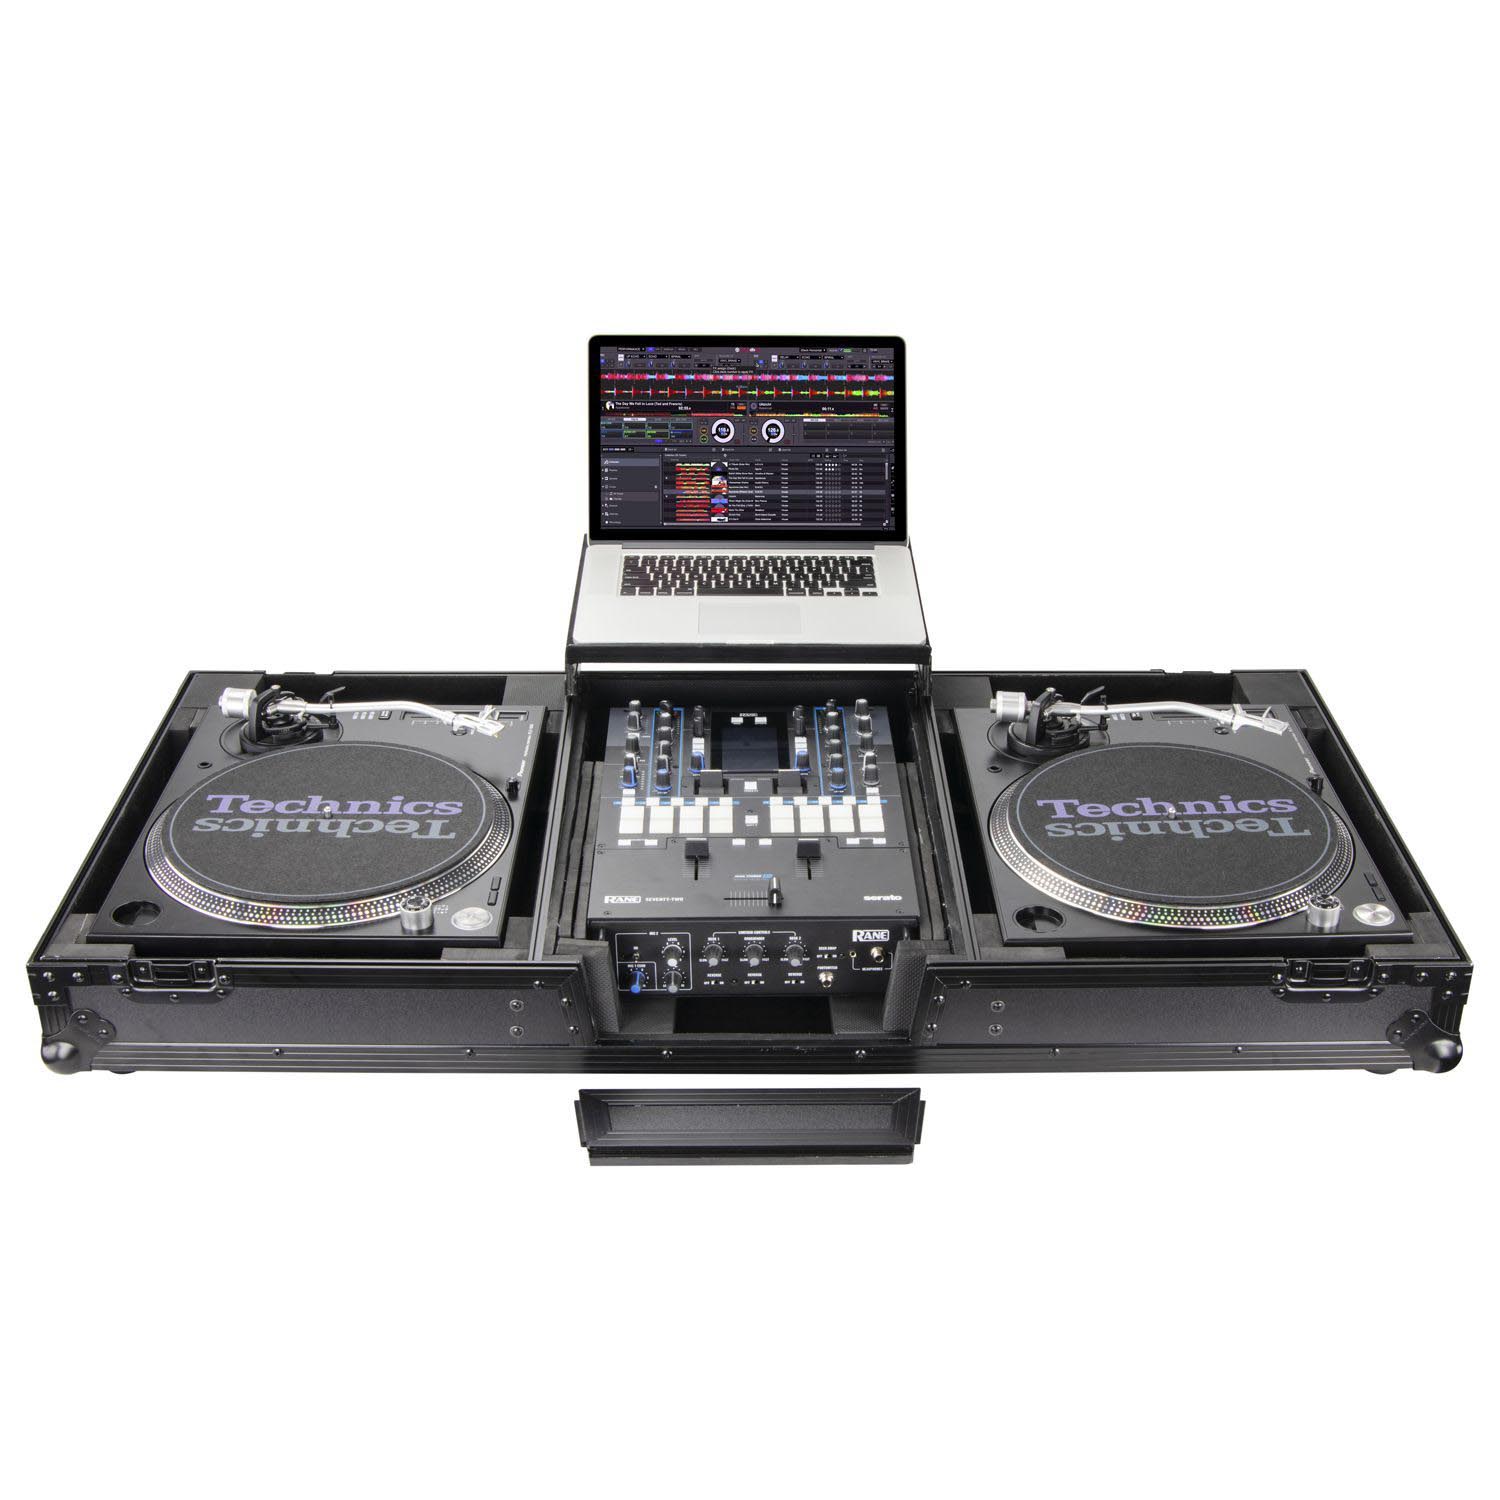 B-Stock: Odyssey FZGSLBM12WRBL Black Low Profile 12″ Format DJ Mixer and Two Battle Position Turntables Flight Coffin Case with Wheels and Glide Platform - Hollywood DJ